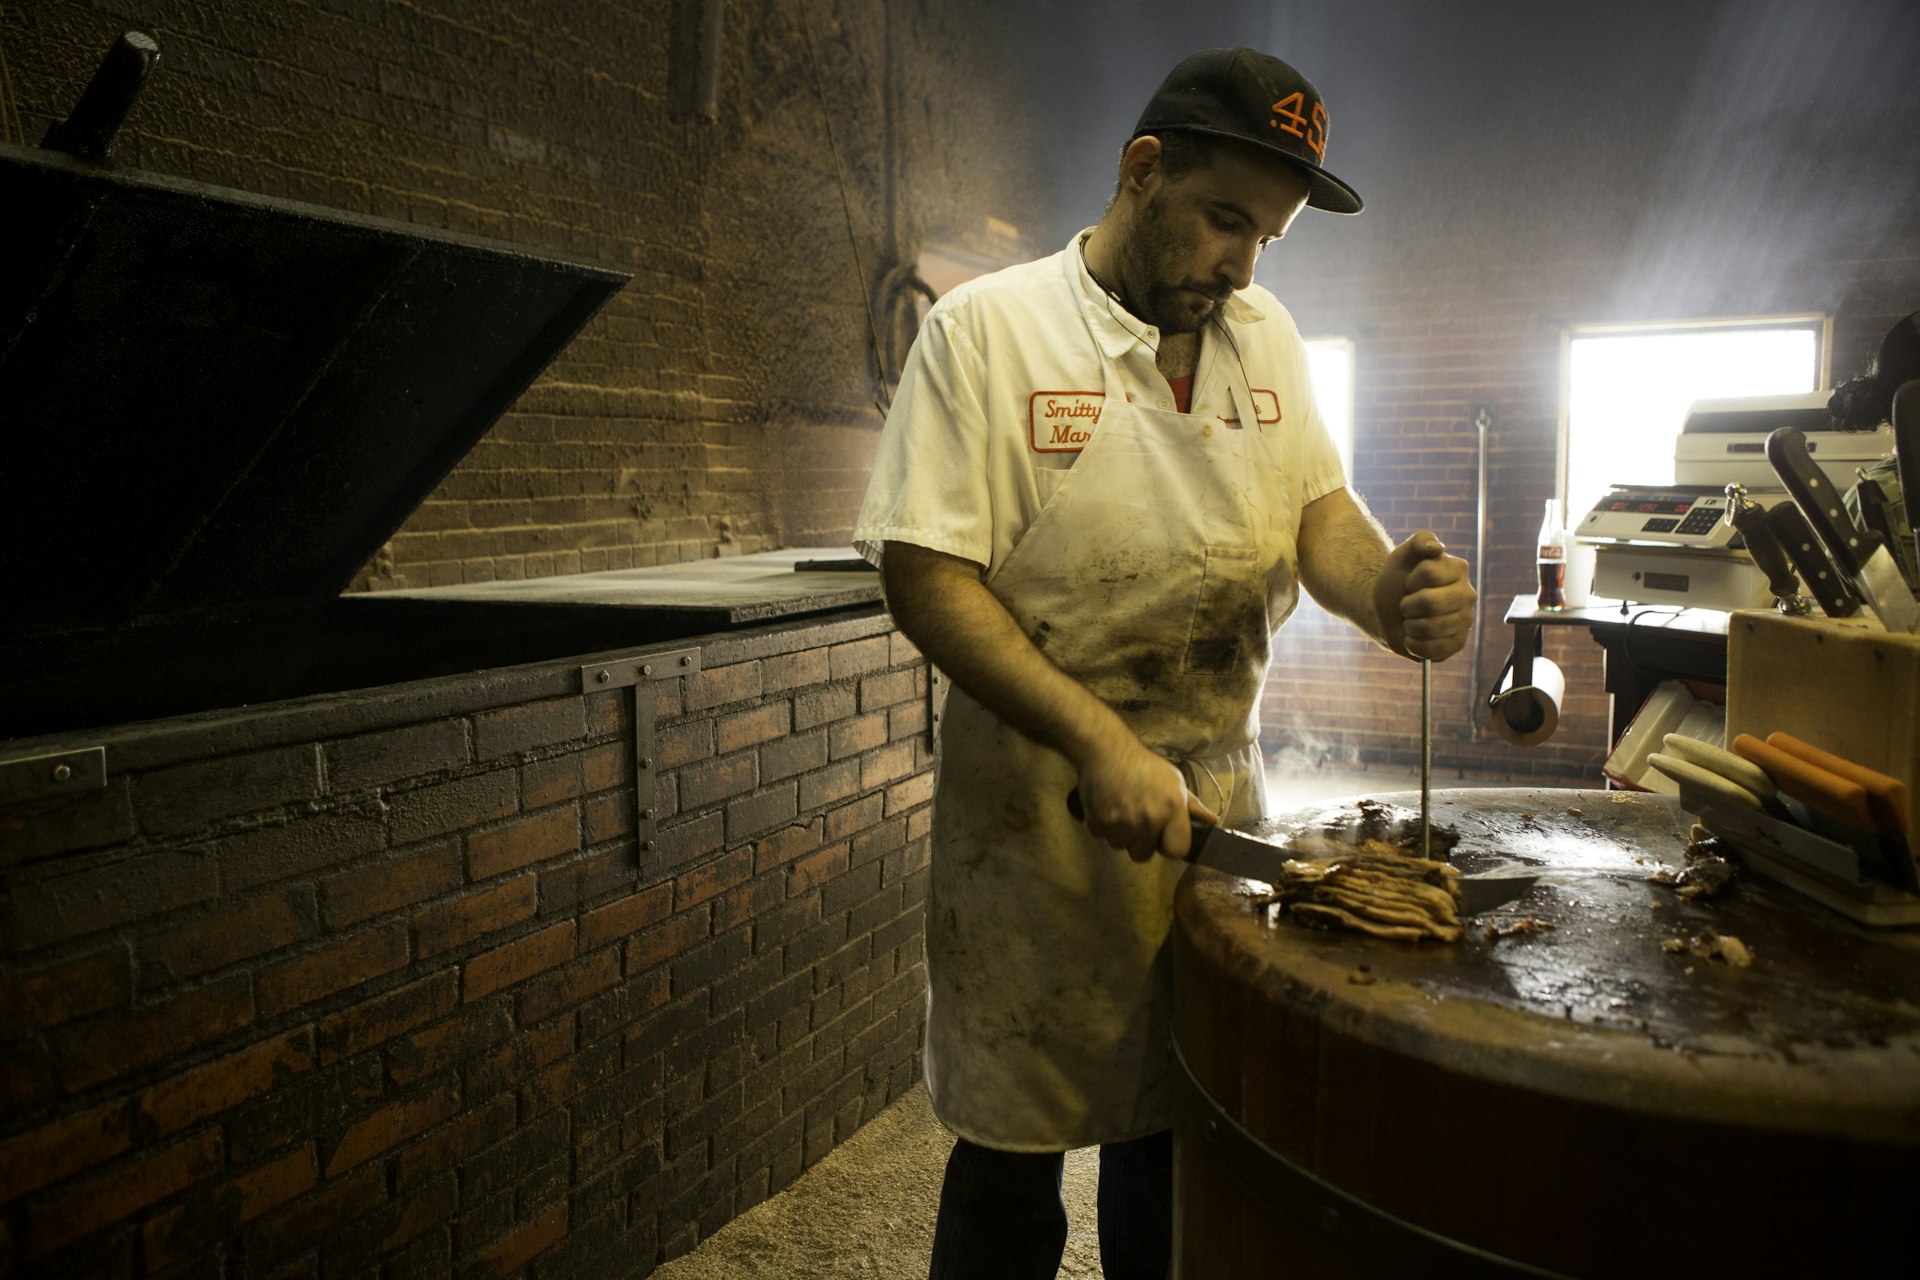 A worker slices barbecue for a customer at Smitty's Market in Lockhart, Texas